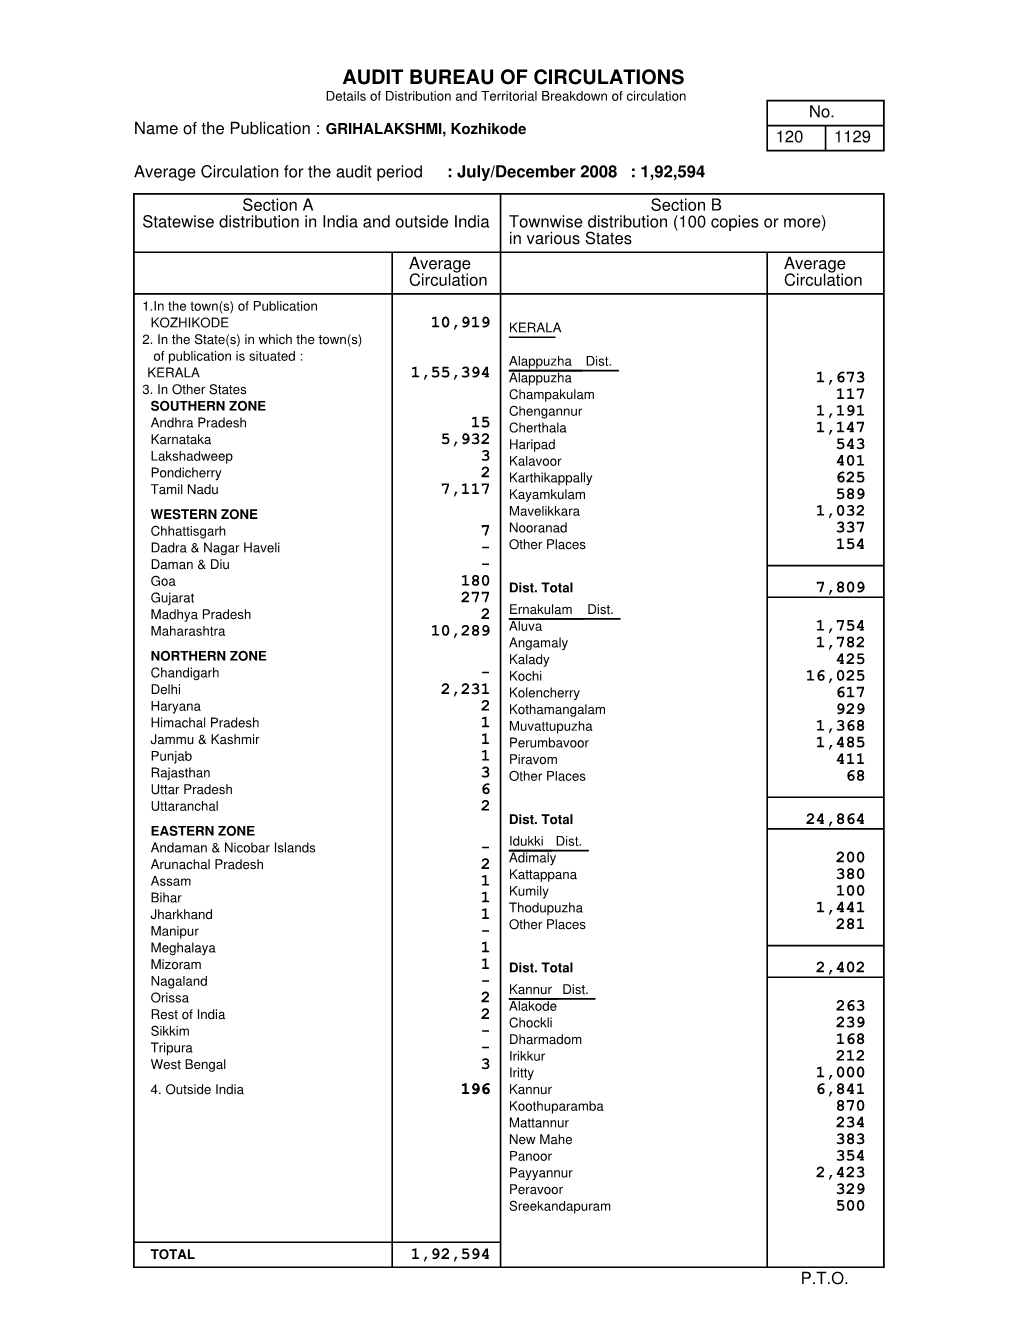 AUDIT BUREAU of CIRCULATIONS Details of Distribution and Territorial Breakdown of Circulation No